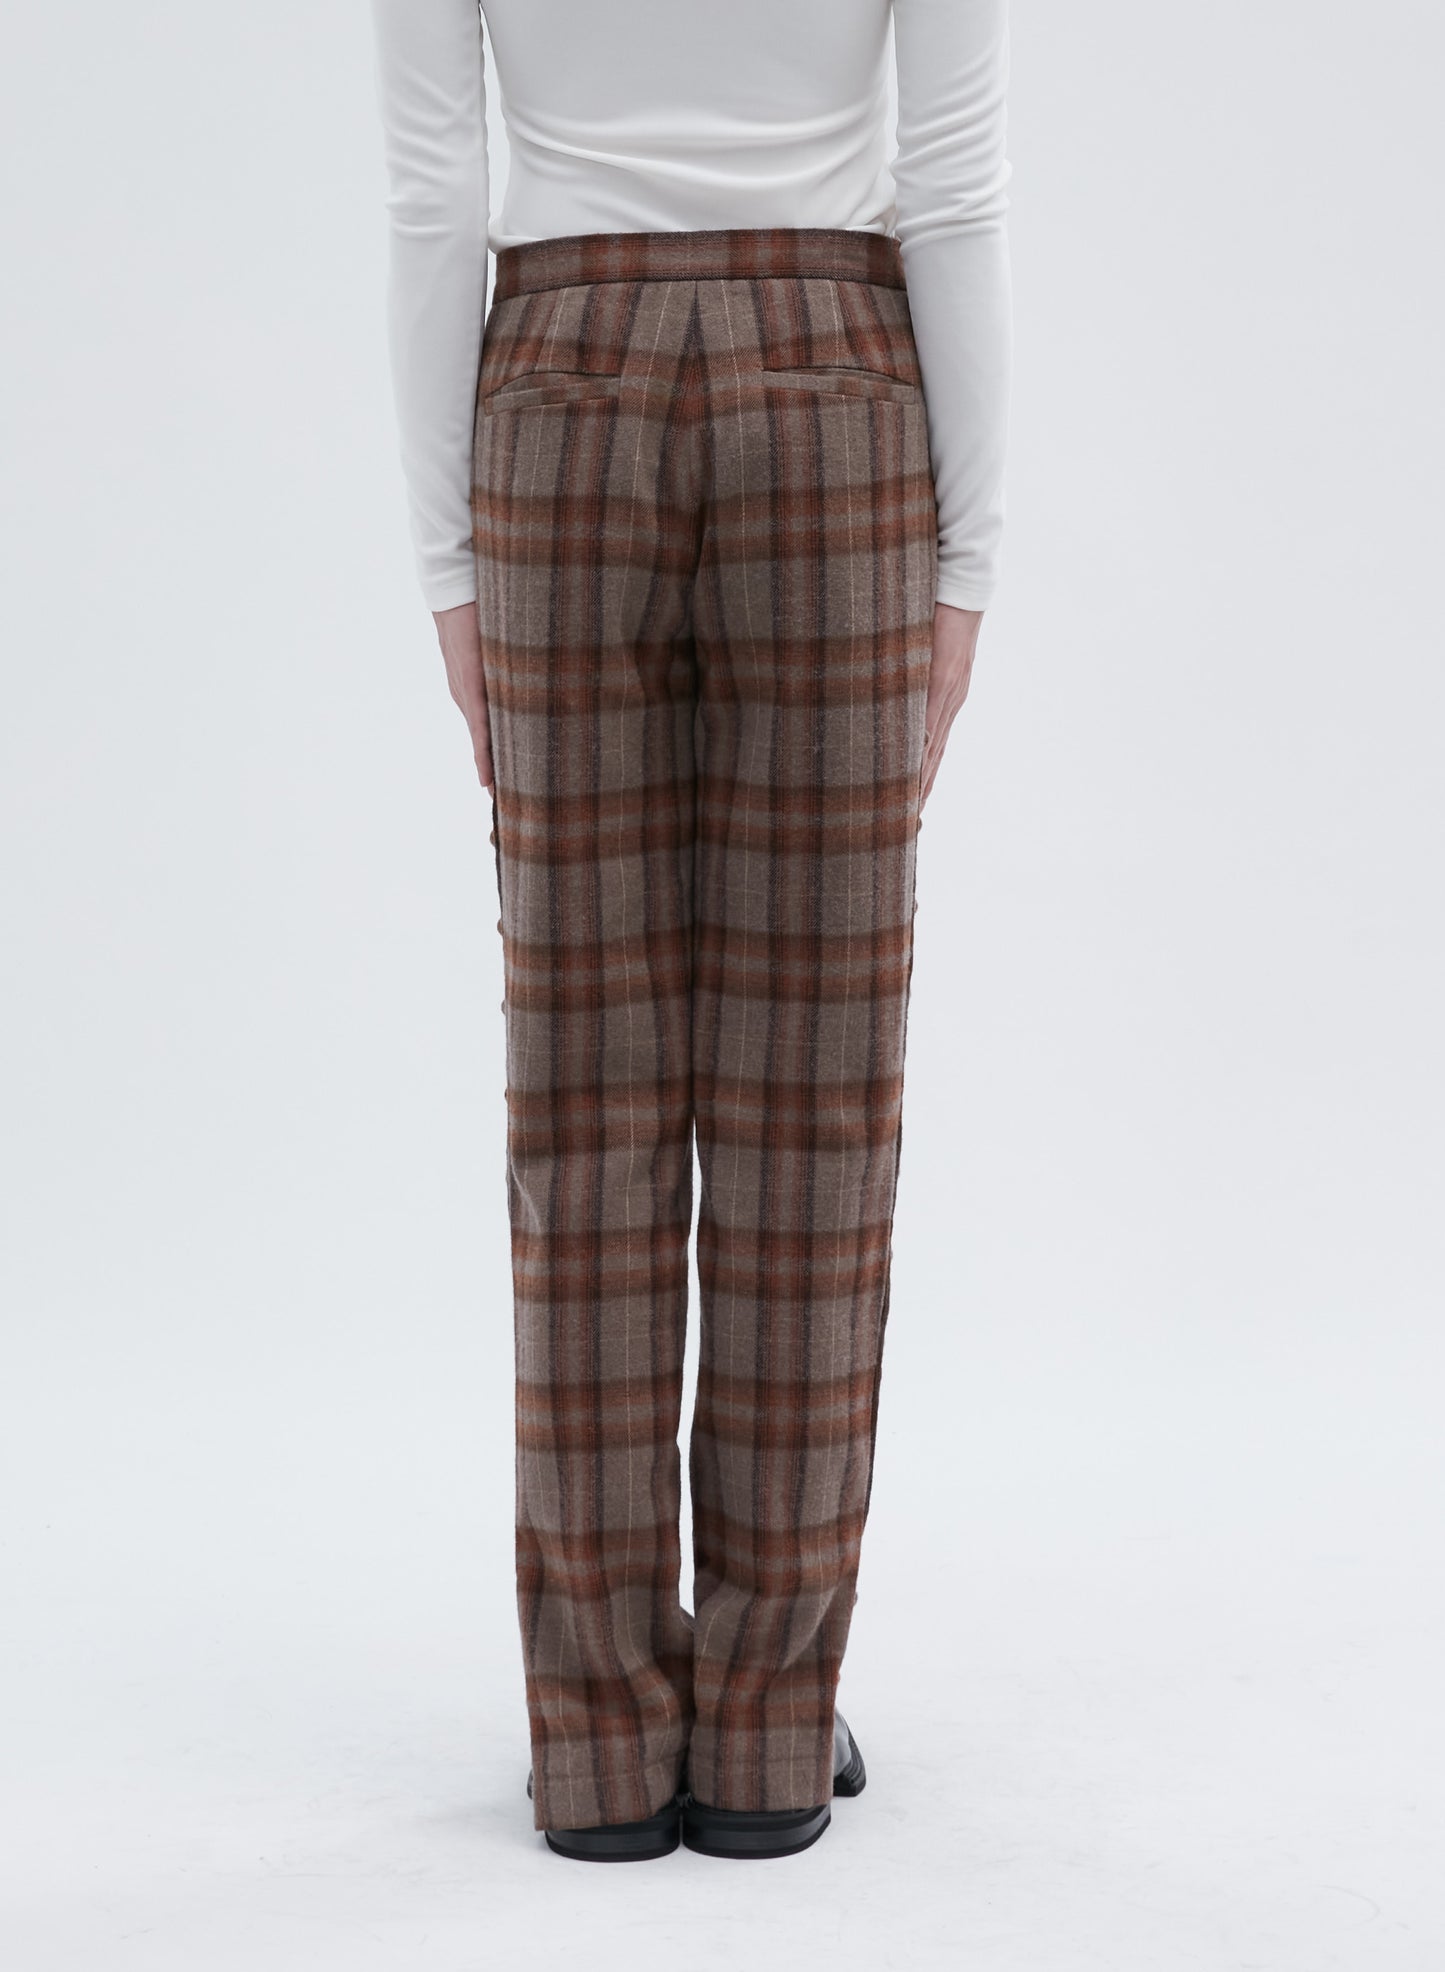 Timber Trouser